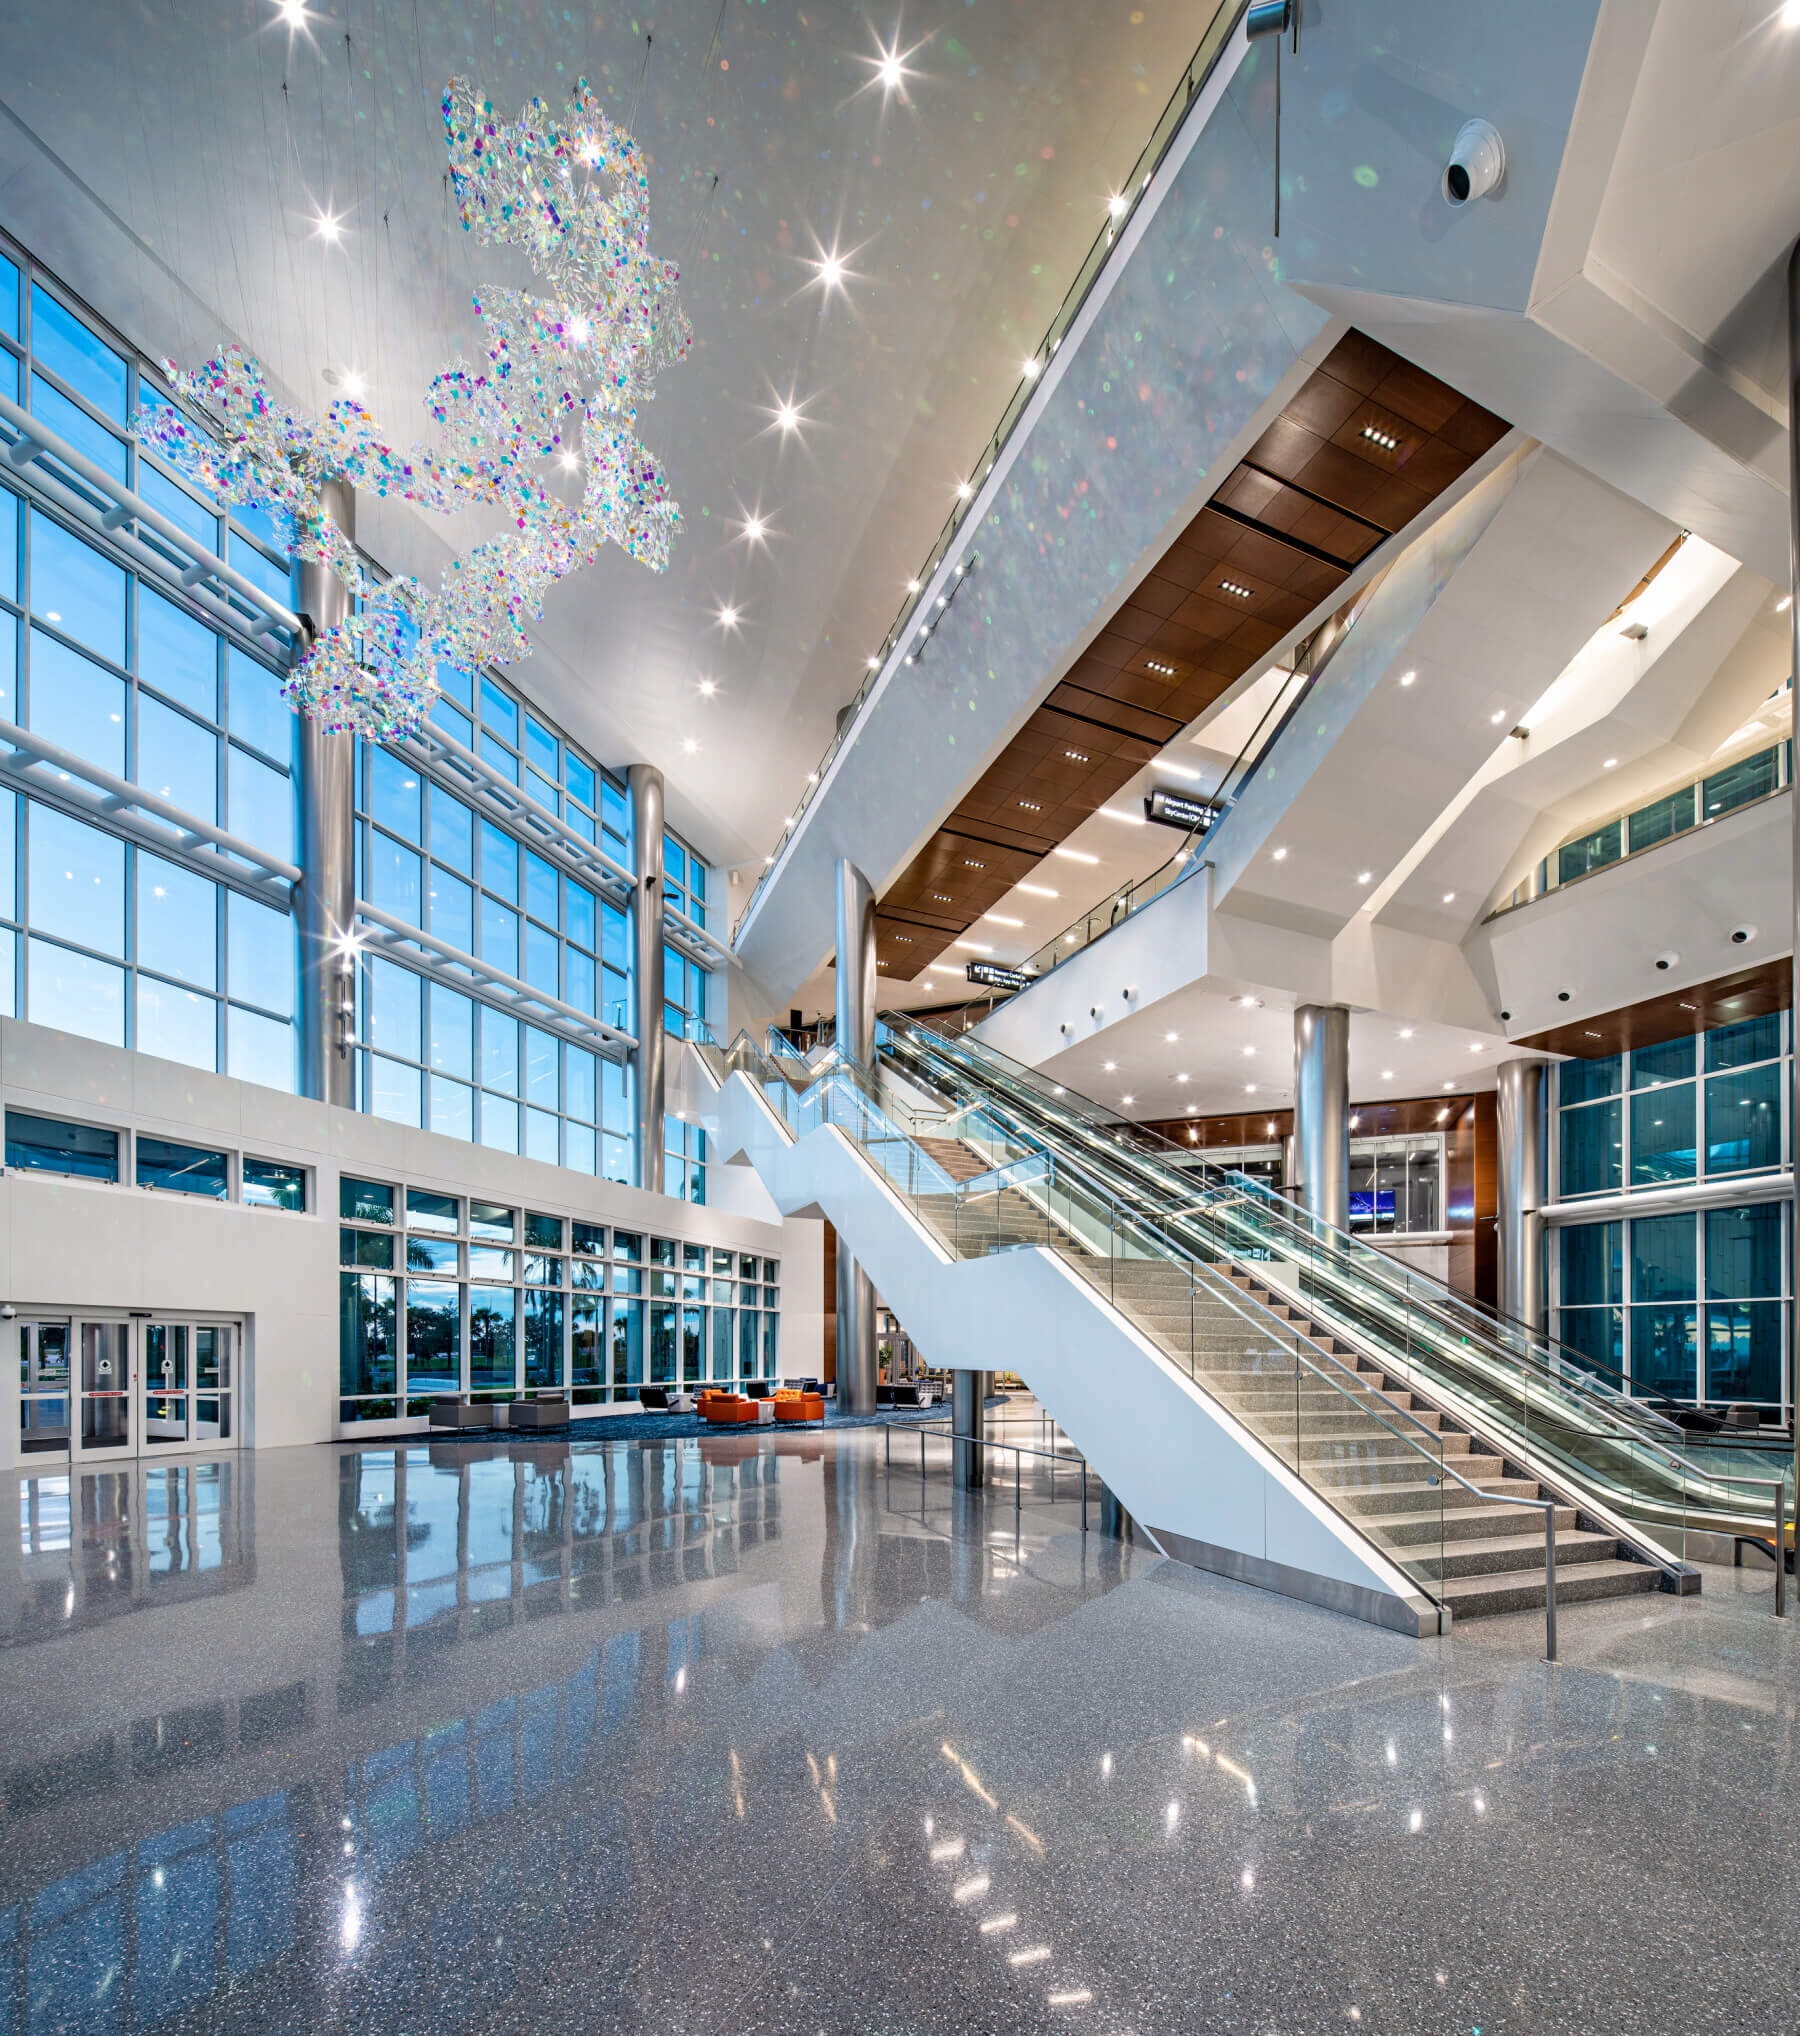 monumental staircase and art sculpture hanging from the ceiling in the artrium at the SkyCenter development at Tampa International Airport